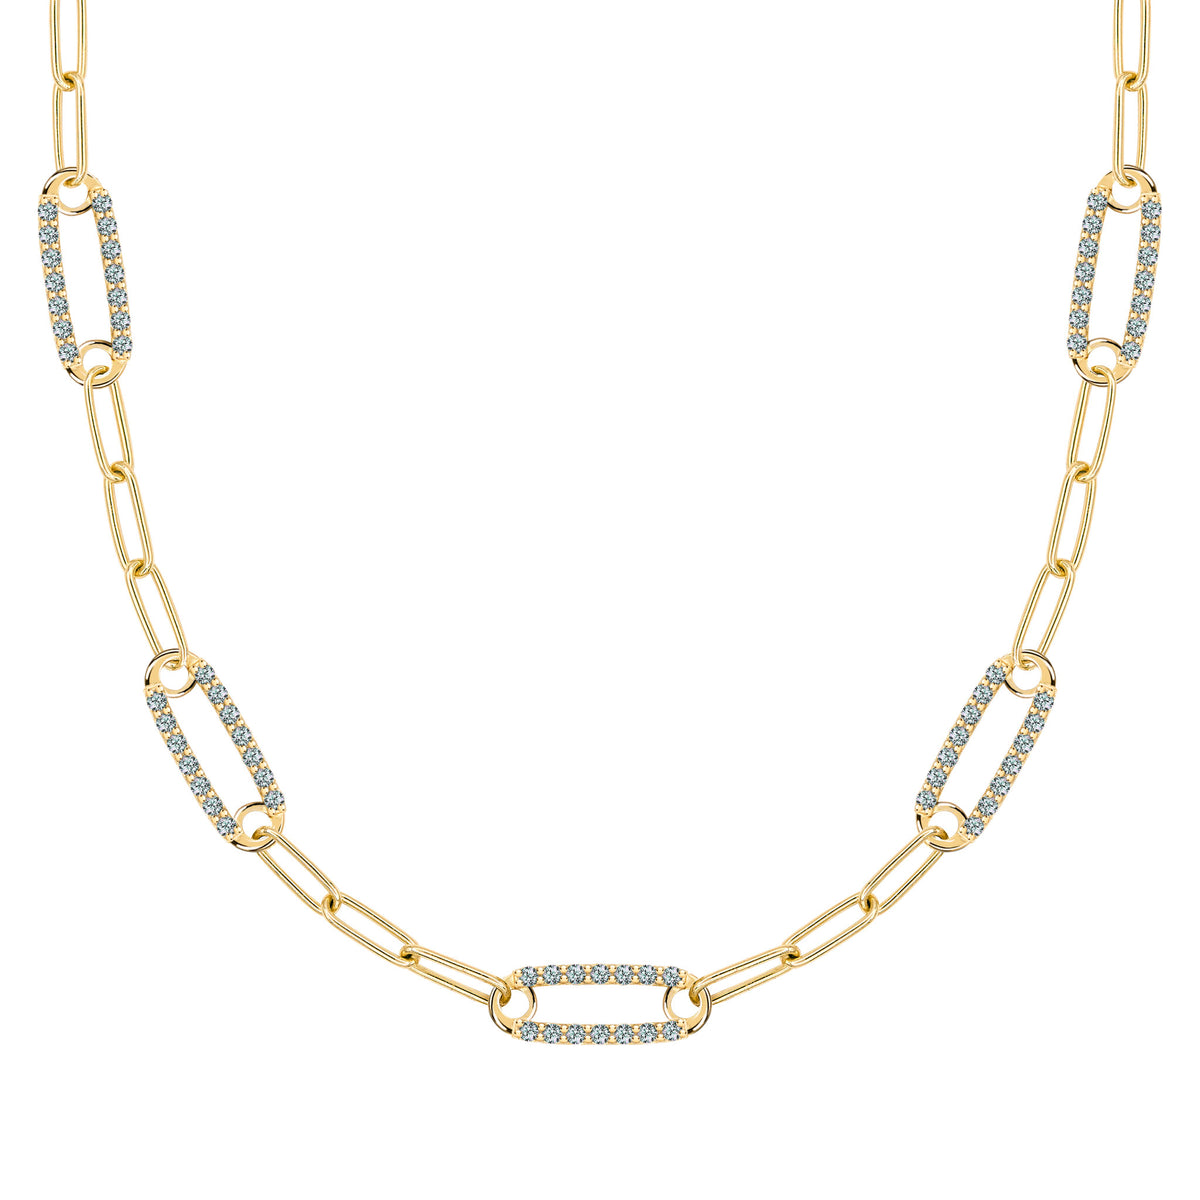 Diamond Carabiner Necklace 20 Inches / 14K Yellow Gold